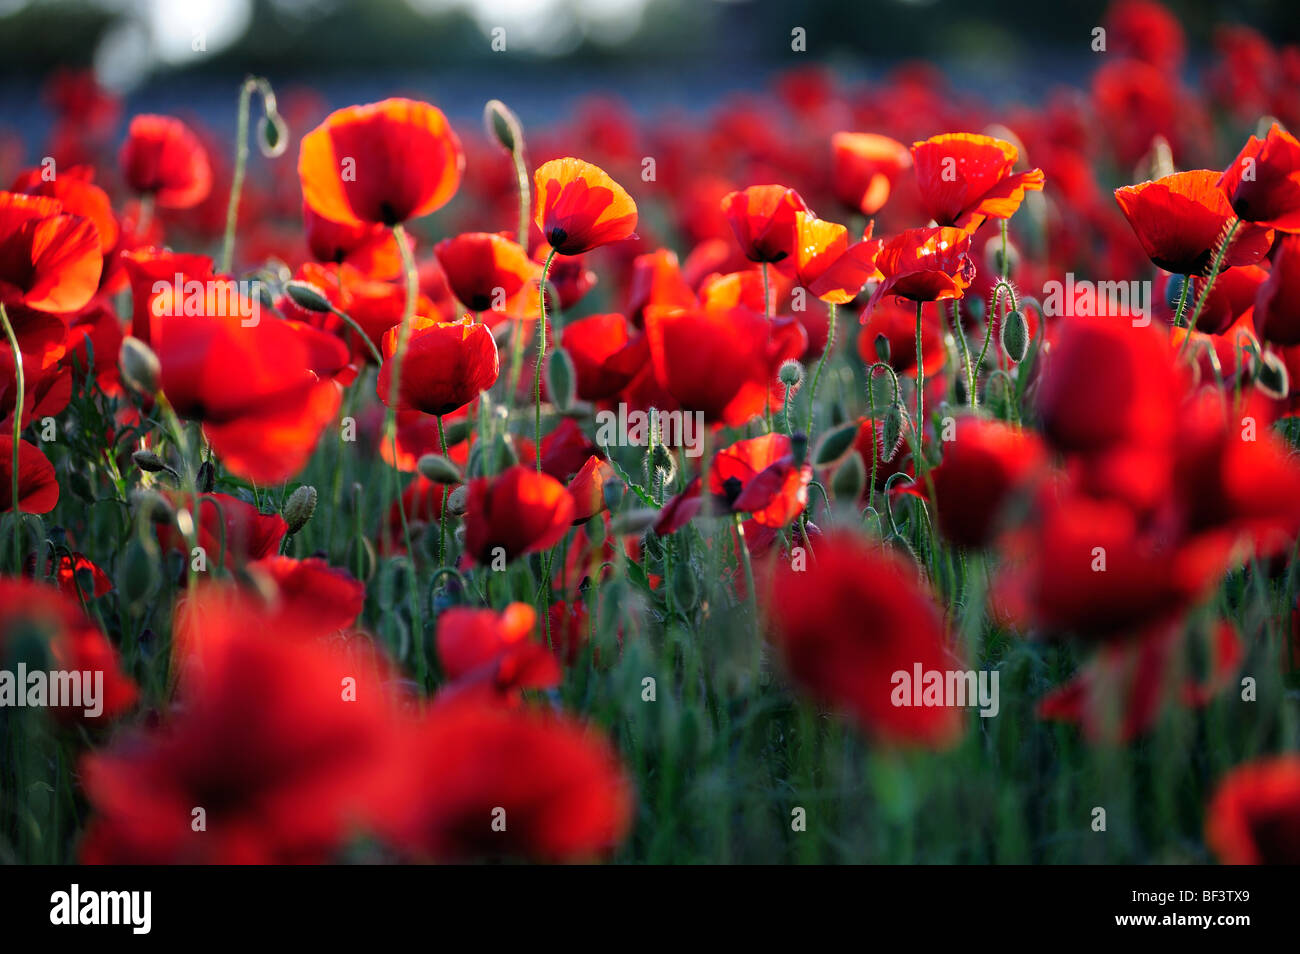 Poppy wild flowers red poppies red green nature environment poppy fields Stock Photo